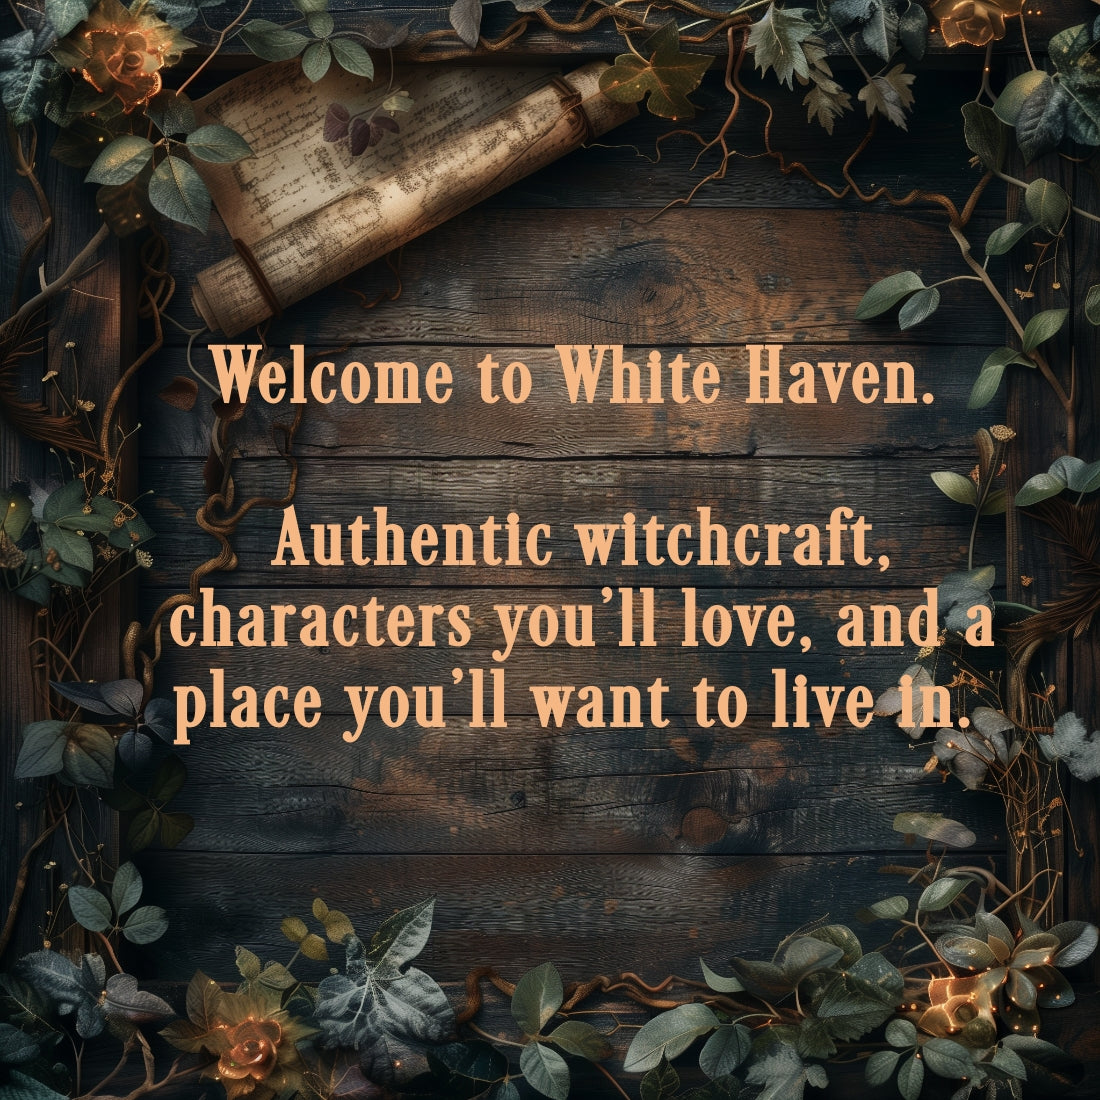 White Haven Witches. Paranormal Mysteries, magic, witchcraft, urban fantasy, supernatural, occult.